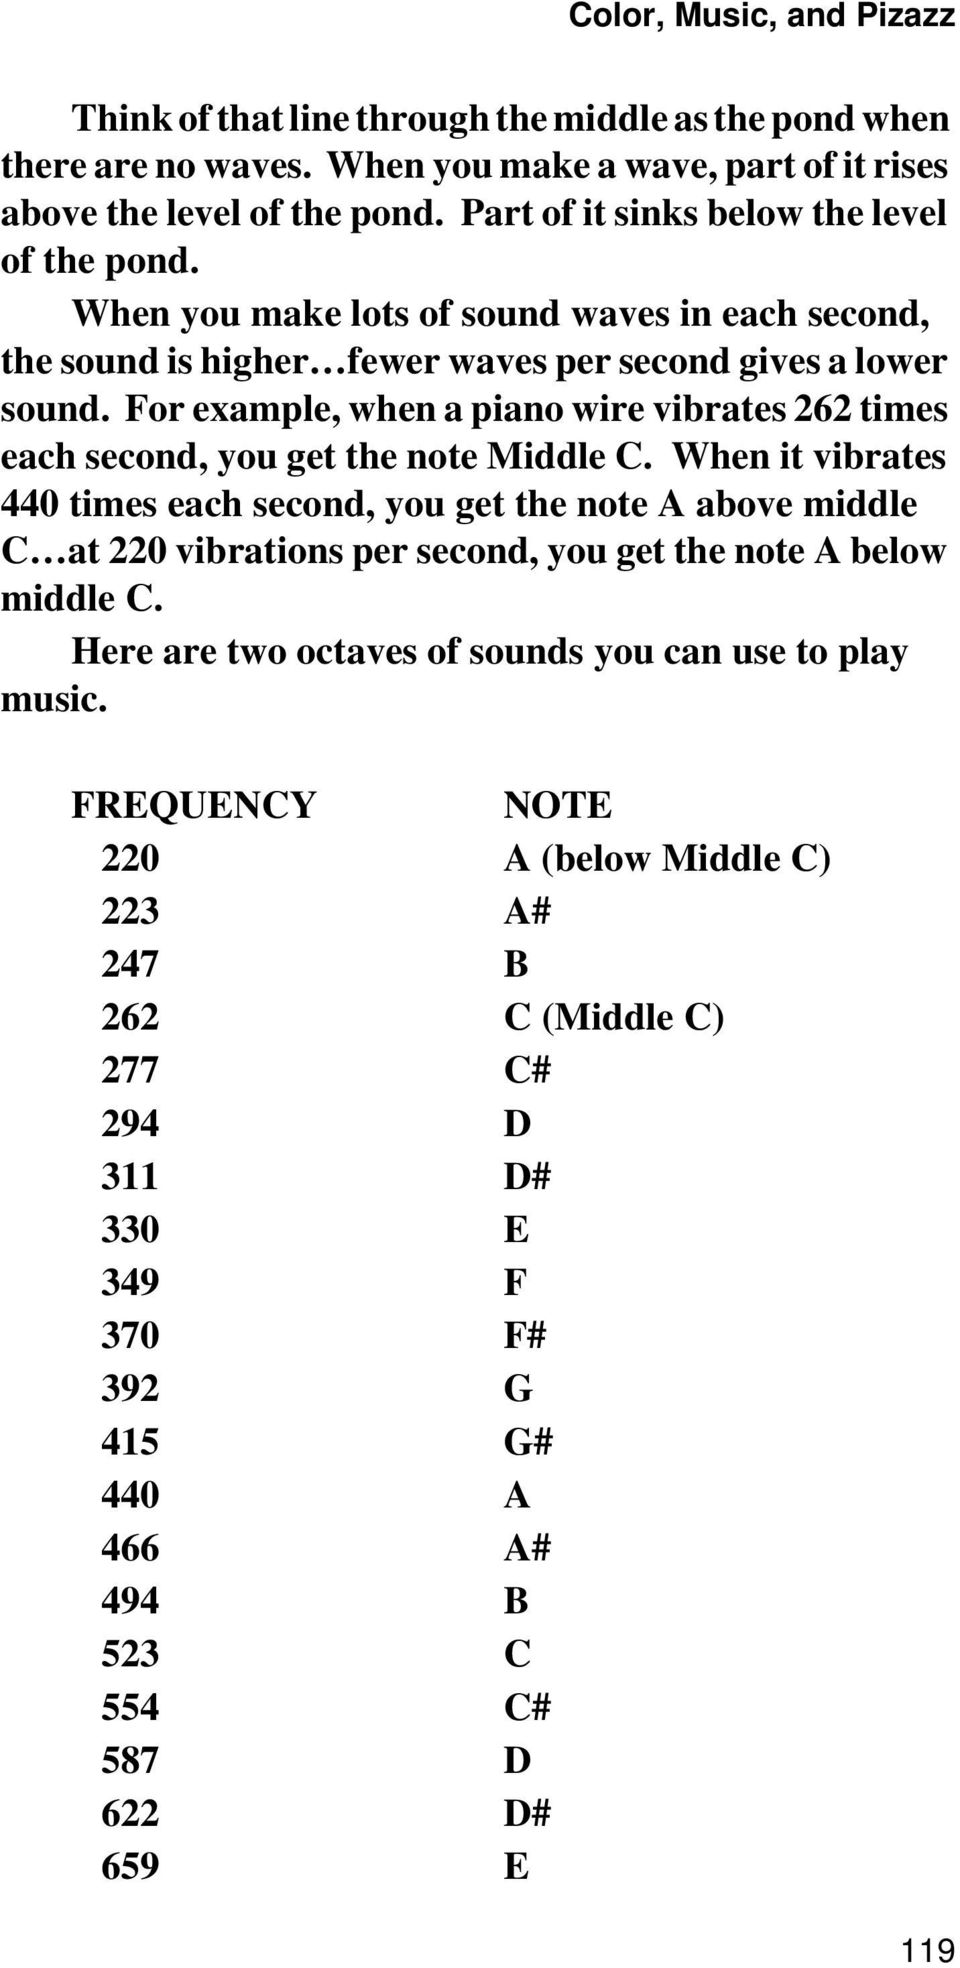 For example, when a piano wire vibrates 262 times each second, you get the note Middle C.